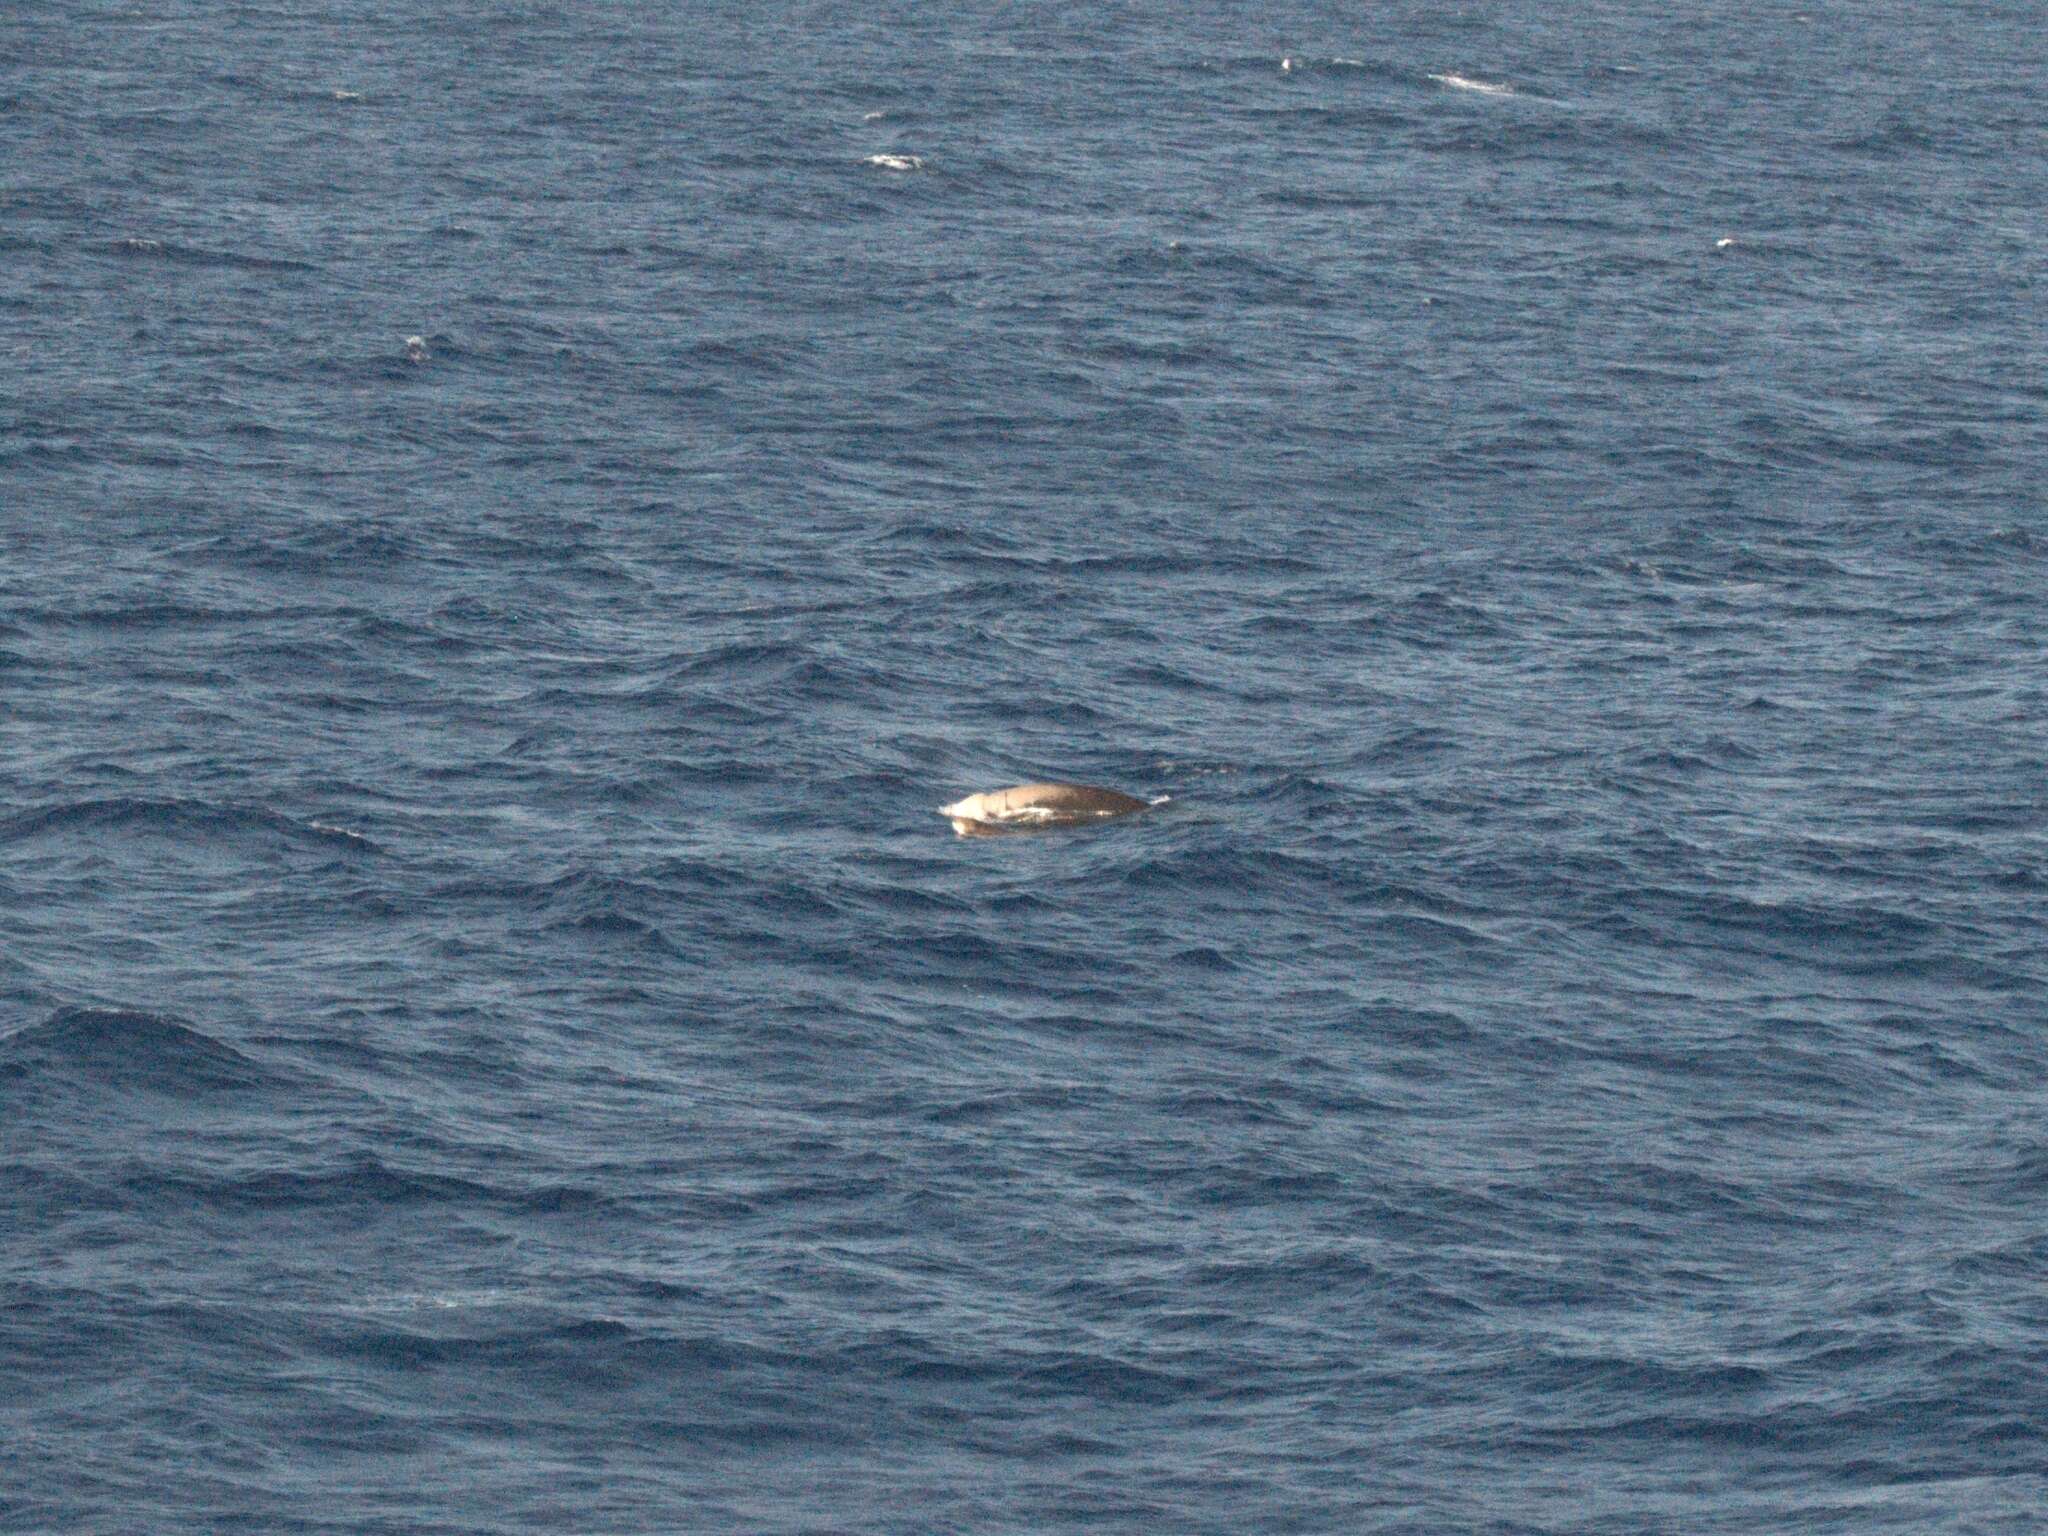 Image of Cuvier's Beaked Whale